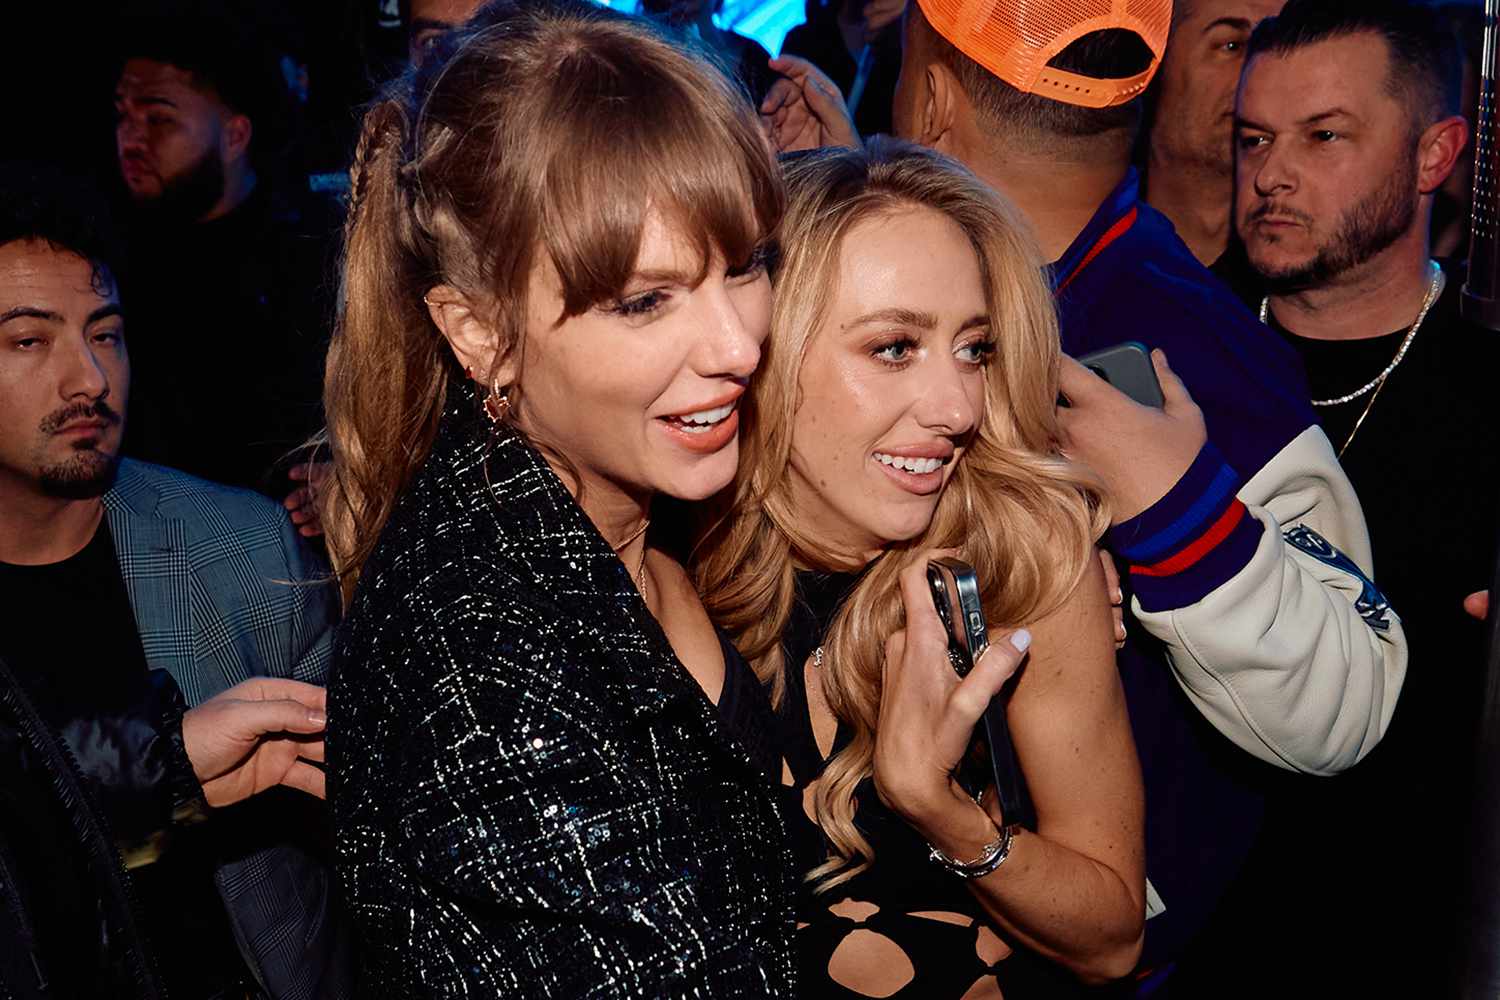 Celebrity BFF Taylor Swift showers Brittany Mahomes with a heartfelt congratulatory message as the exciting news of her third baby unfolds.